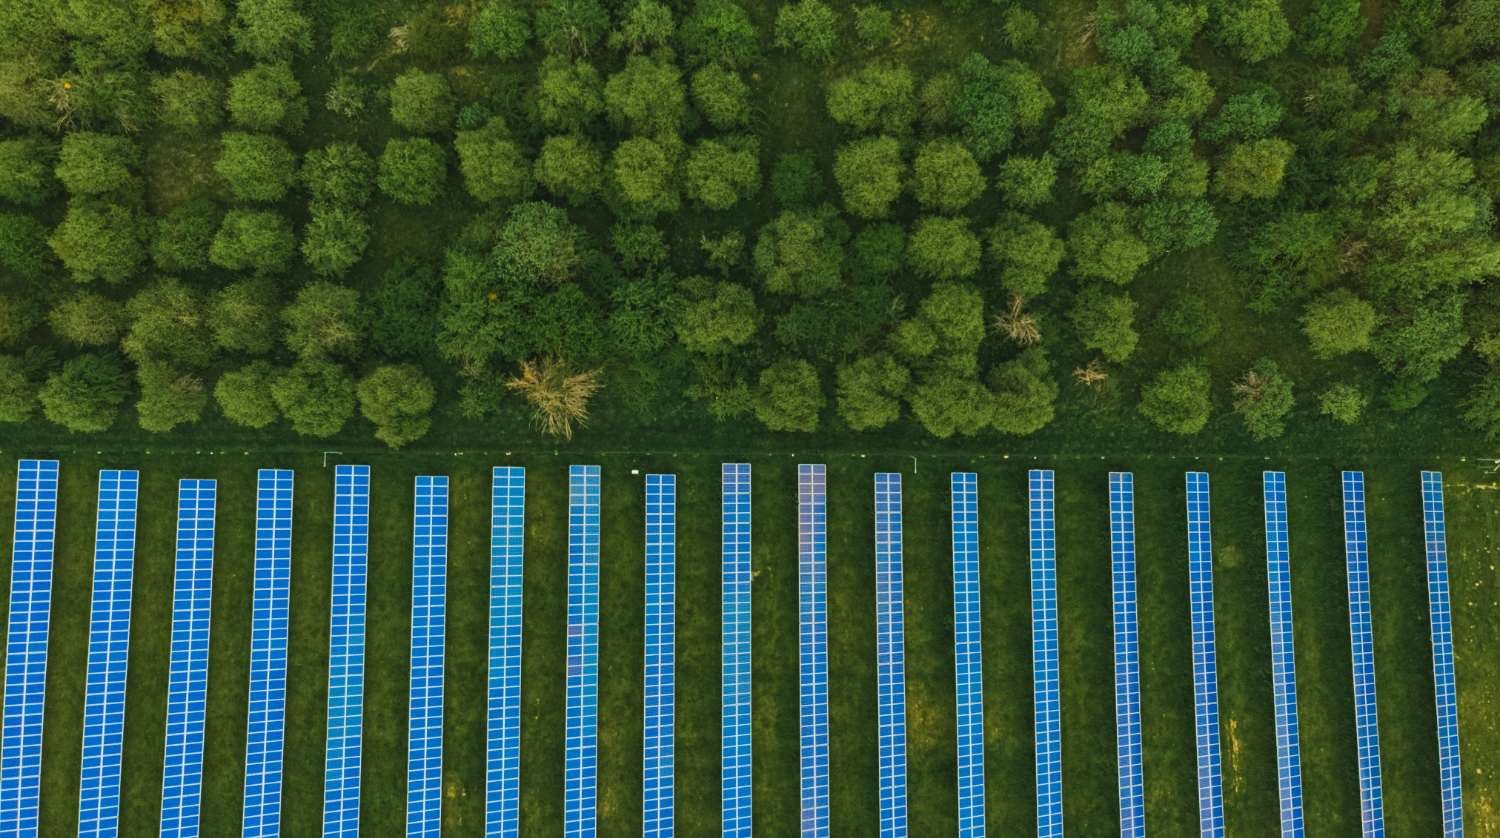 Overhead view of trees and solar panel farm